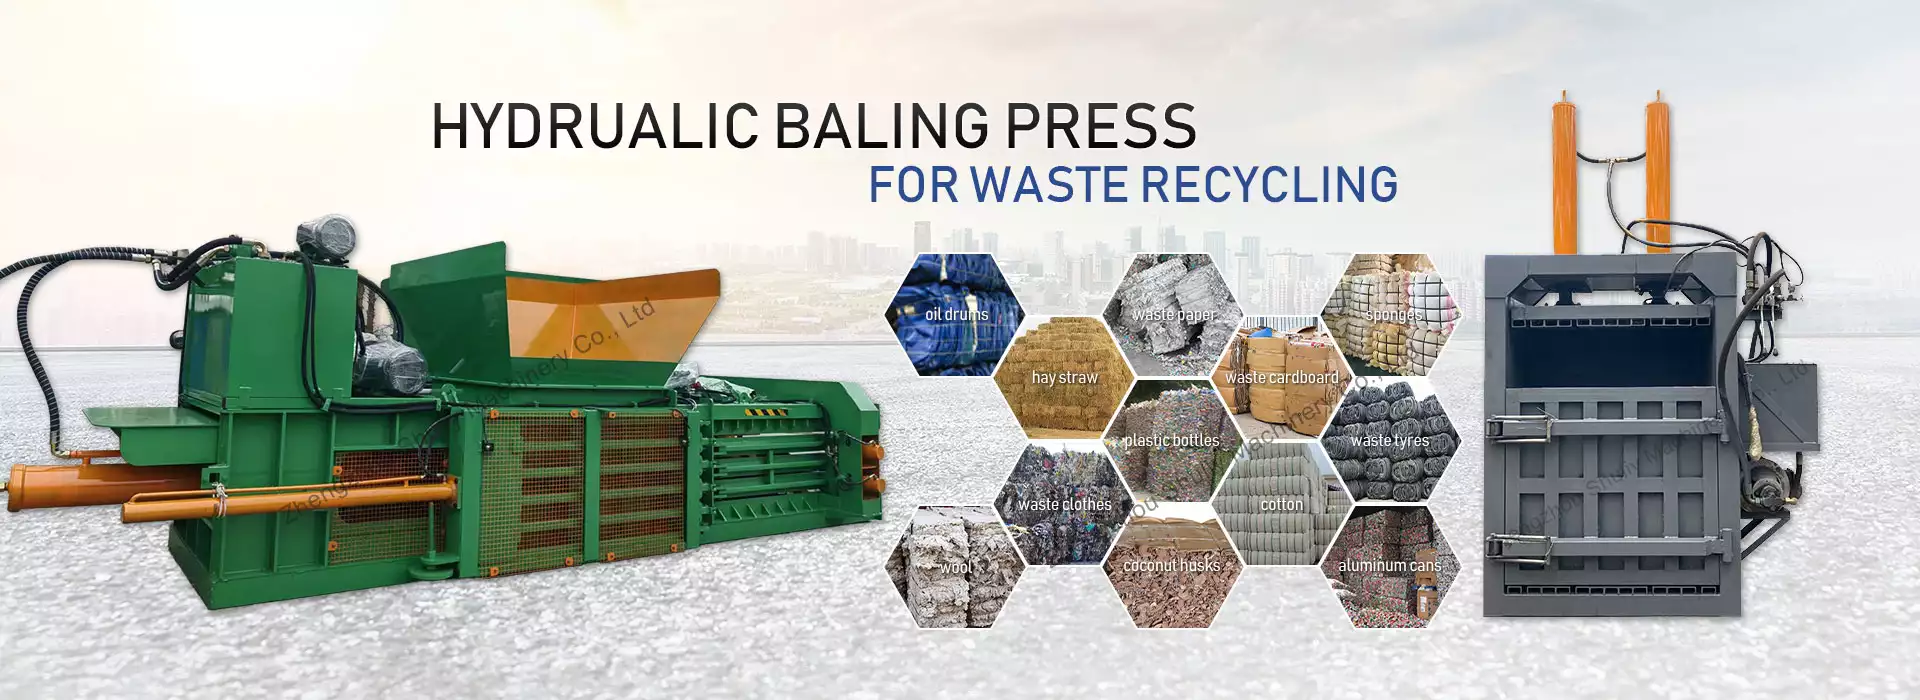 hydraulic baling press for waste recycling